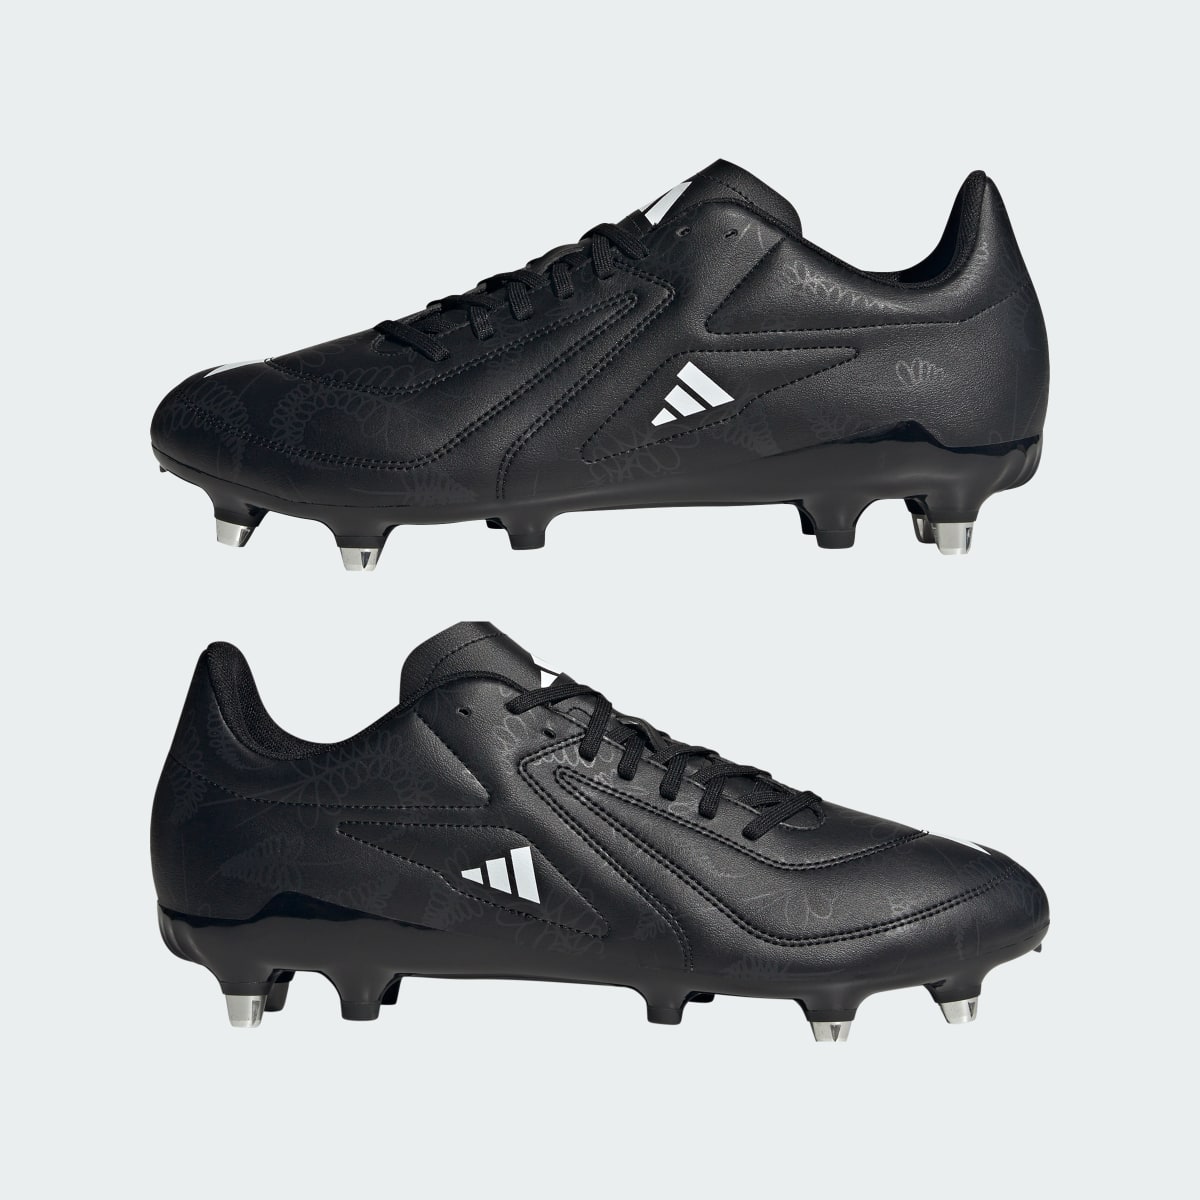 Adidas RS15 Soft Ground Rugby Boots. 8